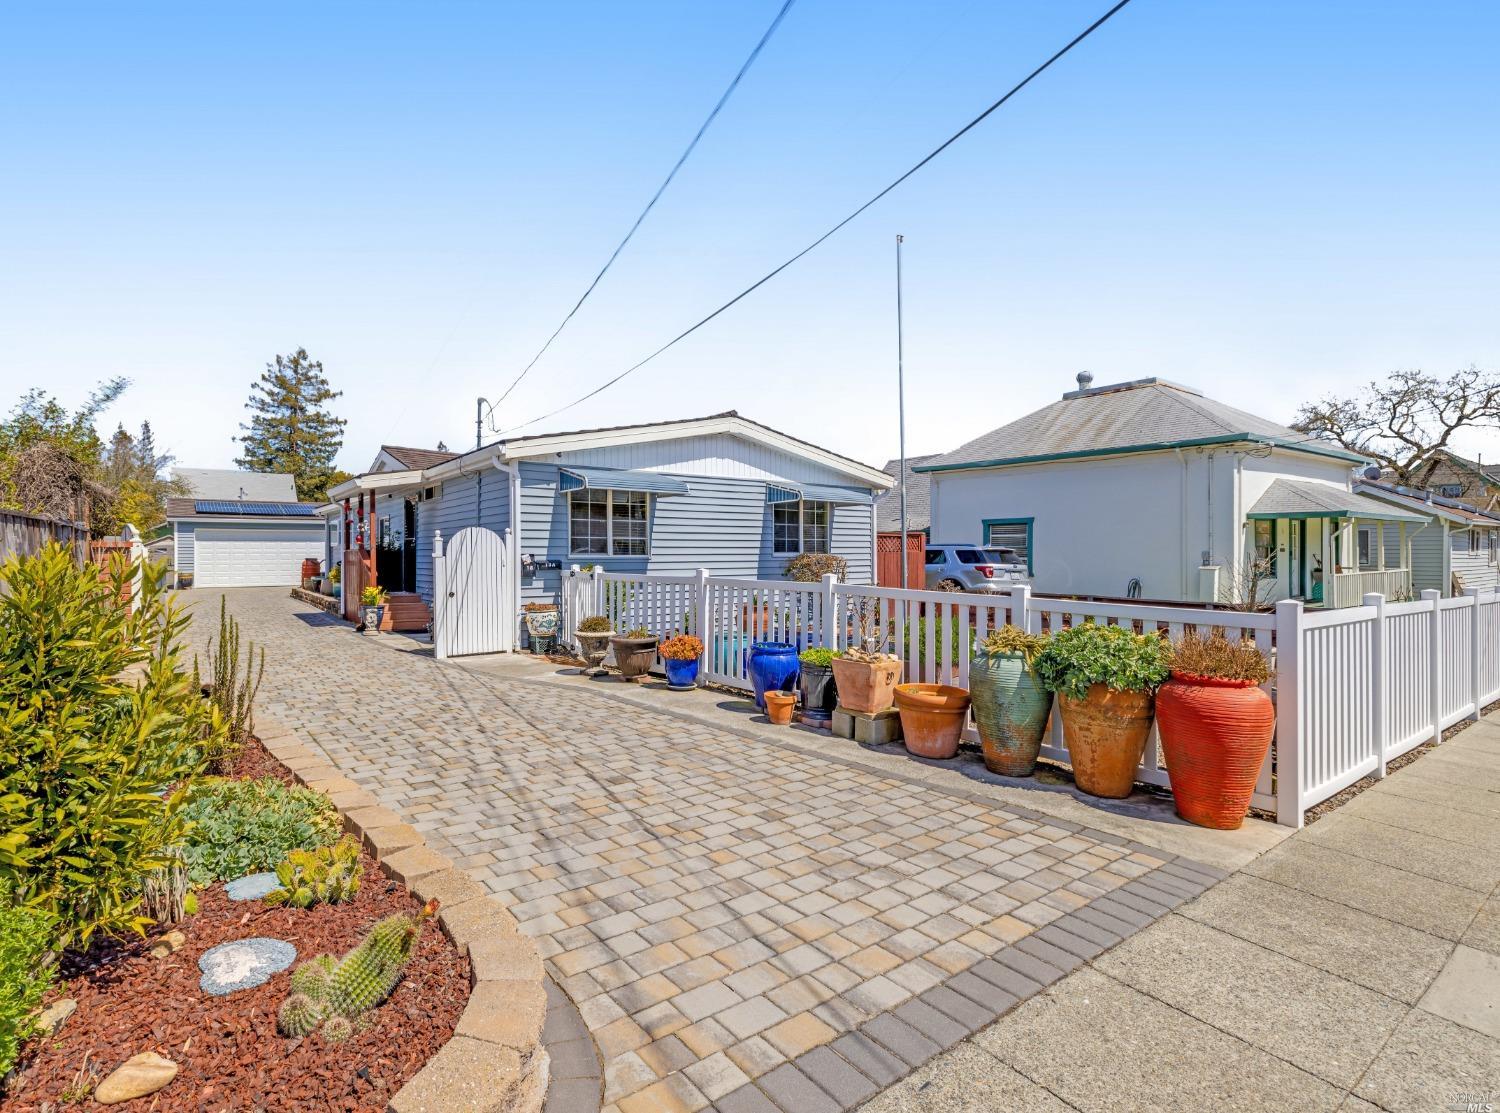 Bonus, your outside oasis offers plenty of room for gardening and entertaining with an oversized two car garage, workshop, office, and plenty of off-street parking. Both home and guest quarter are cozy with all the comforts of home starting with the welcoming front and back porches. The beautiful paver driveway with gated privacy offers excellent location in West Petaluma only moments from downtown and close to schools.  This home is a very special opportunity for its next guardian. Welcome to 18 Webster Street!